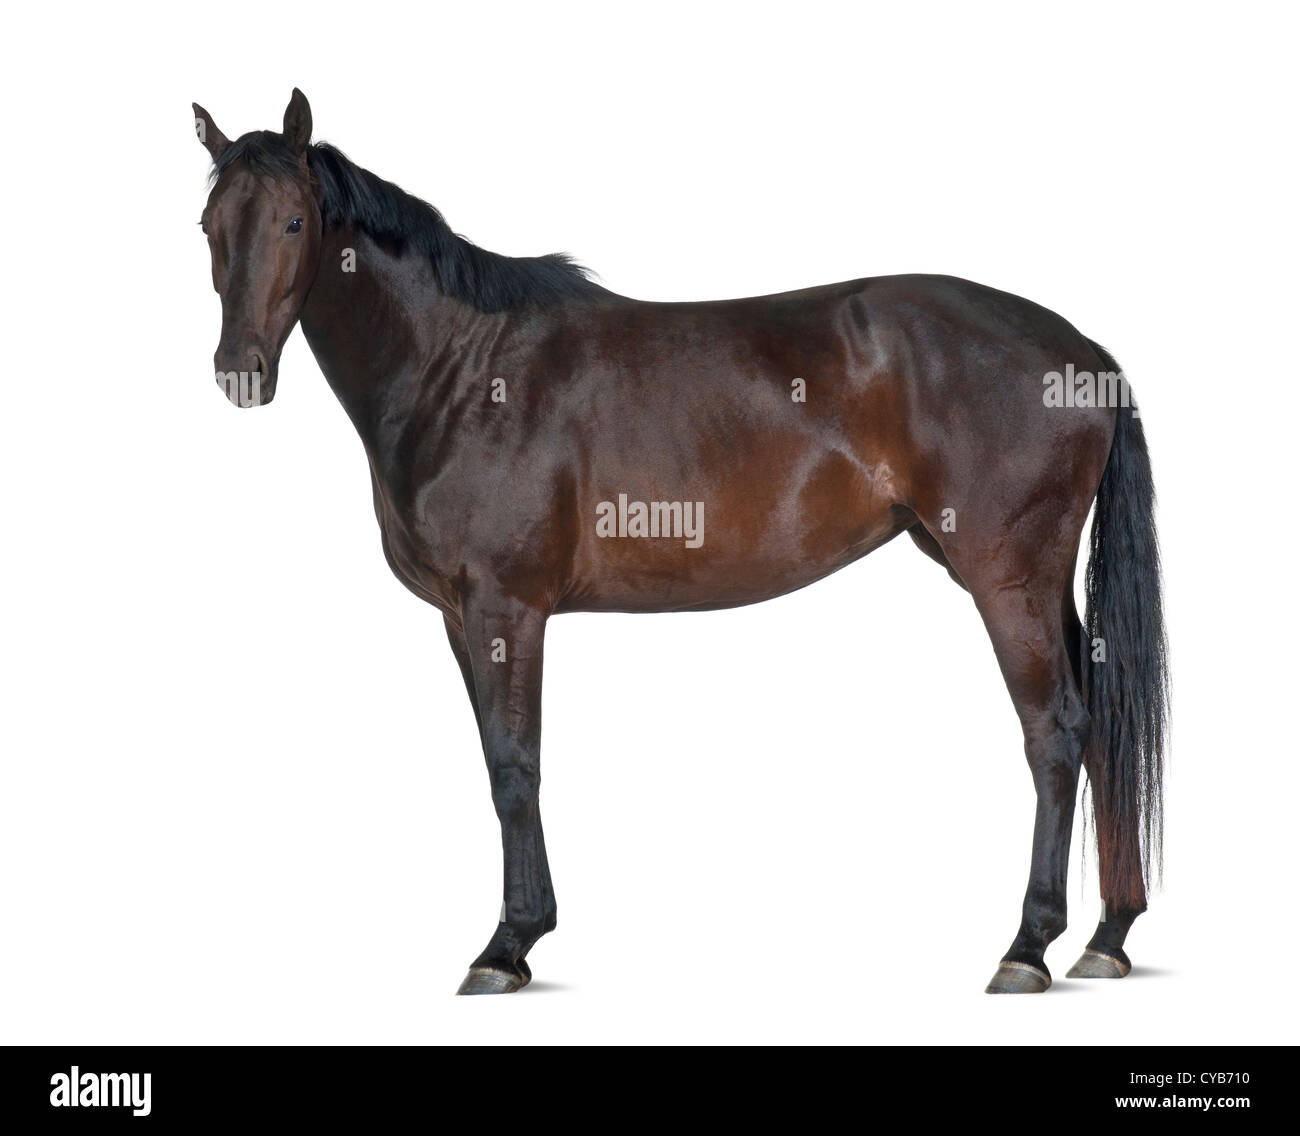 Cheval Warmblood belge, 5 ans, standing against white background Banque D'Images